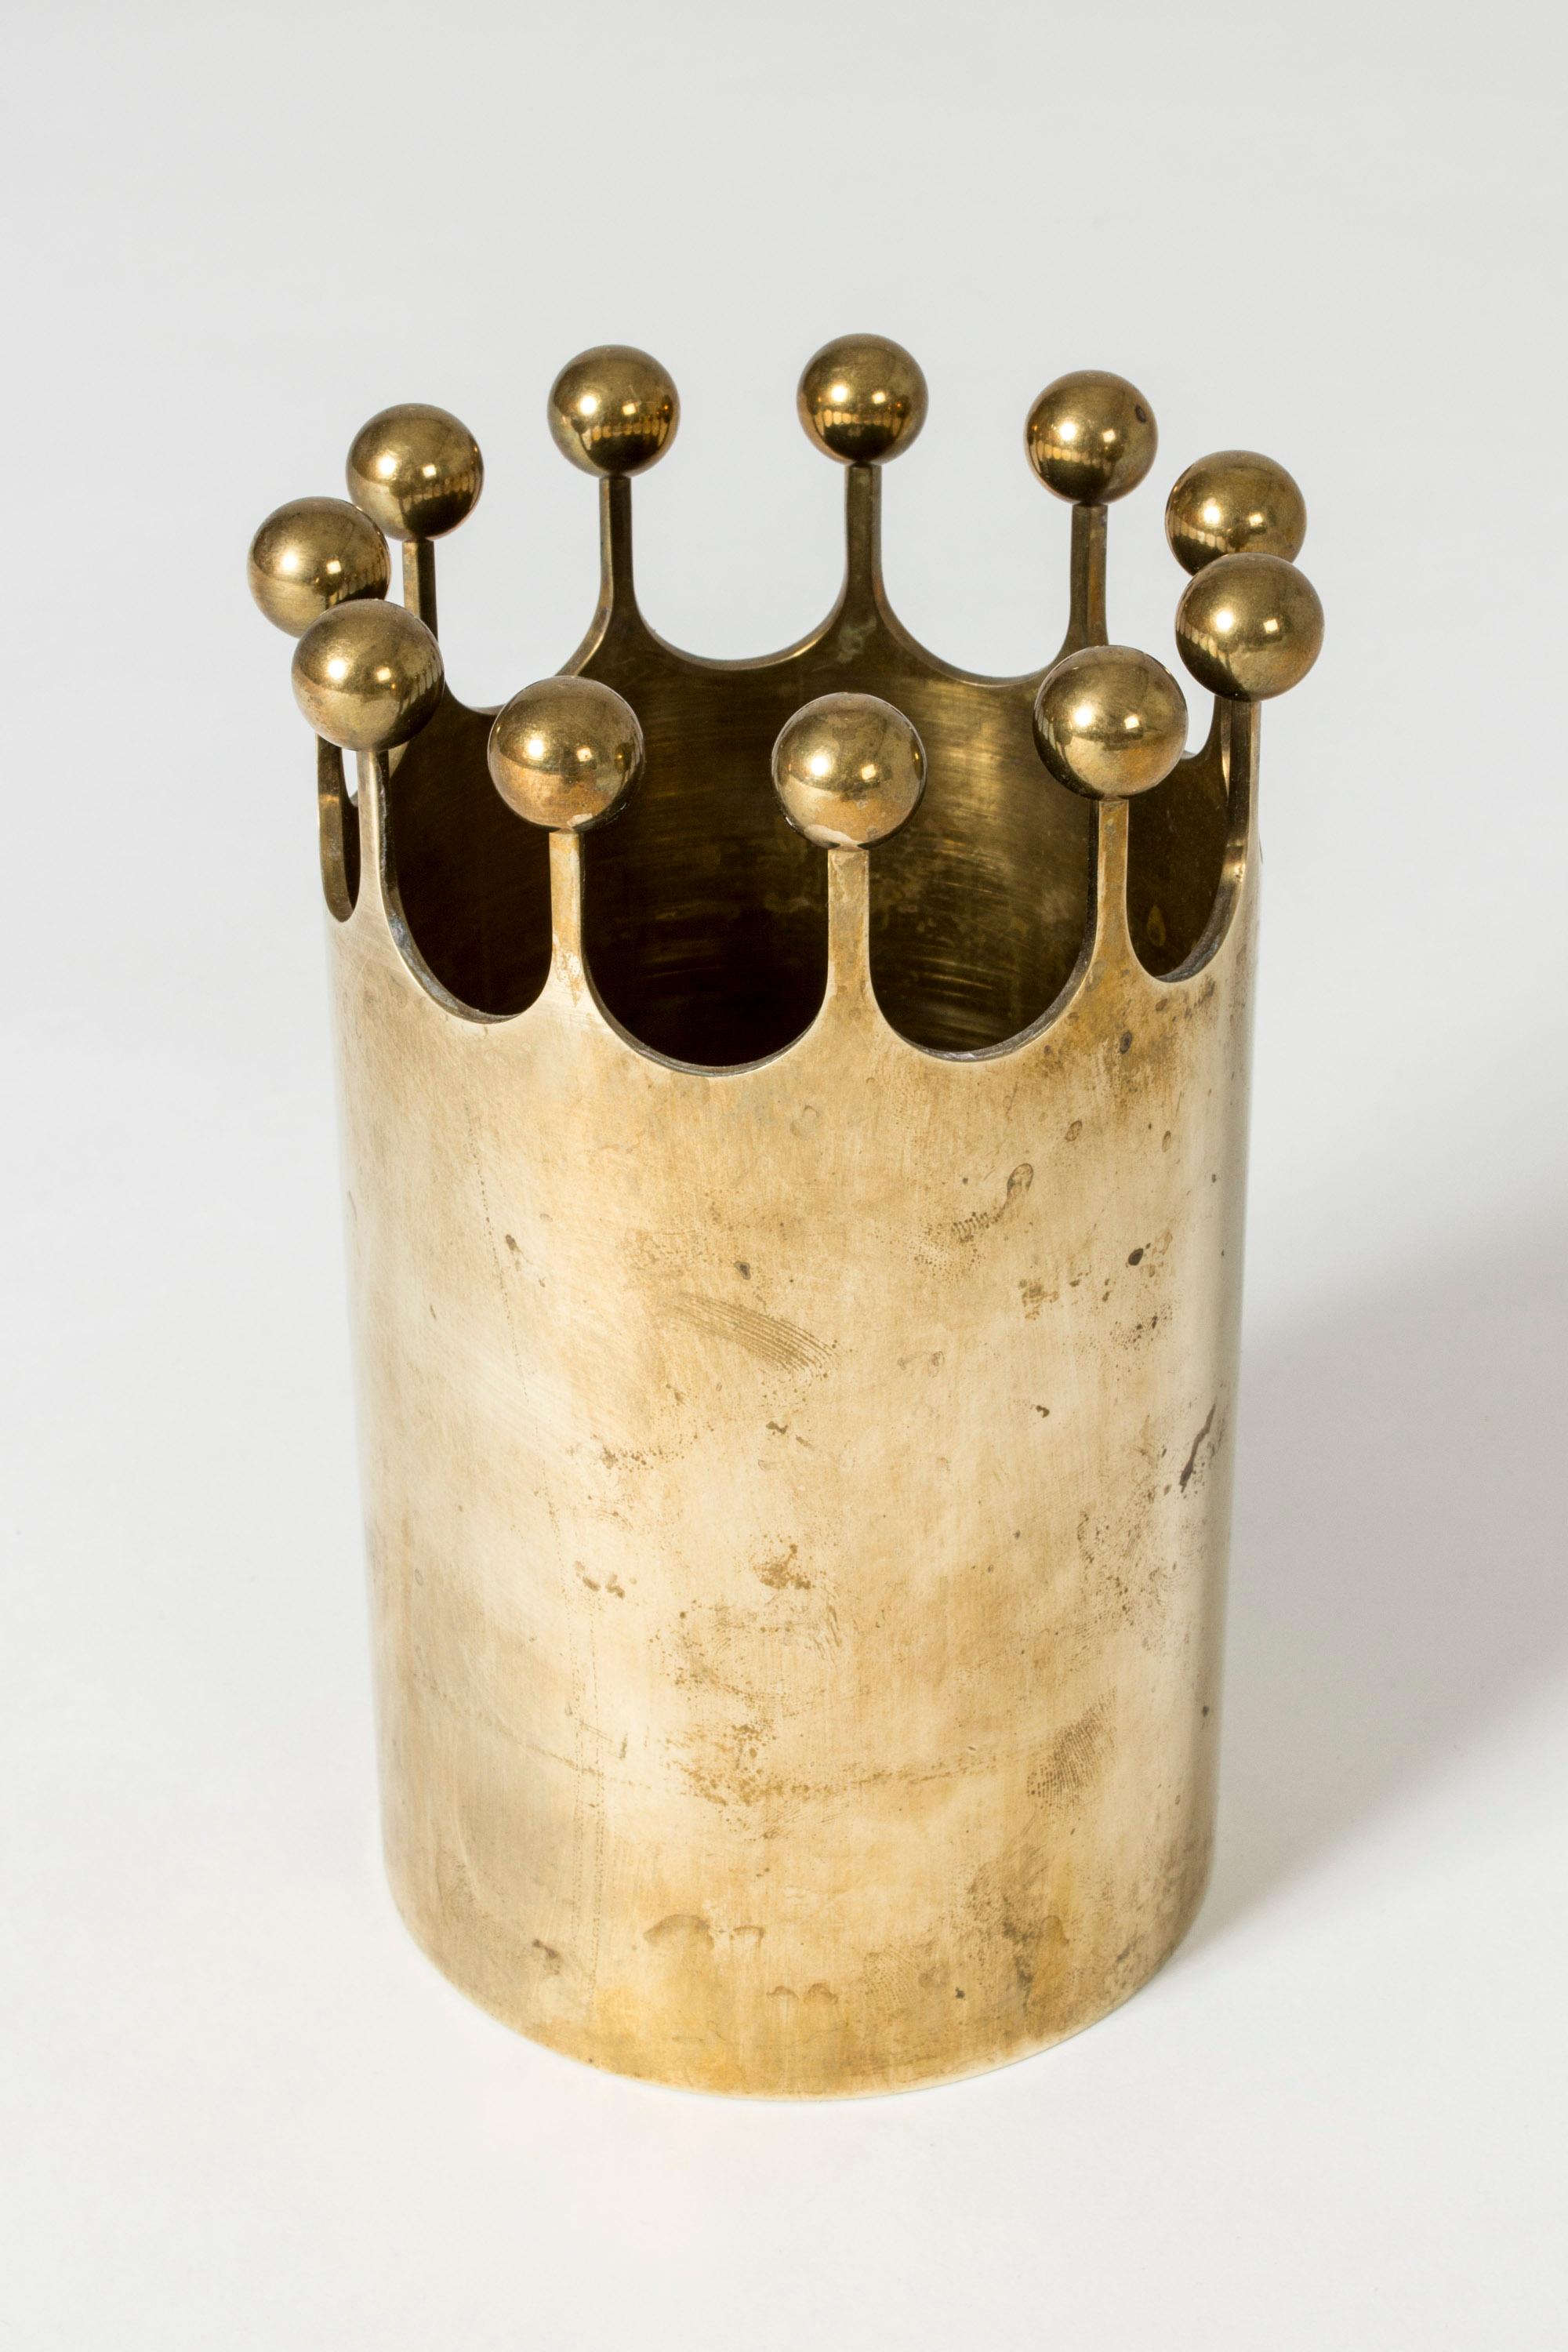 Beautiful brass vase in a crown shape by Pierre Forssell. Fun and luxurious at the same time.